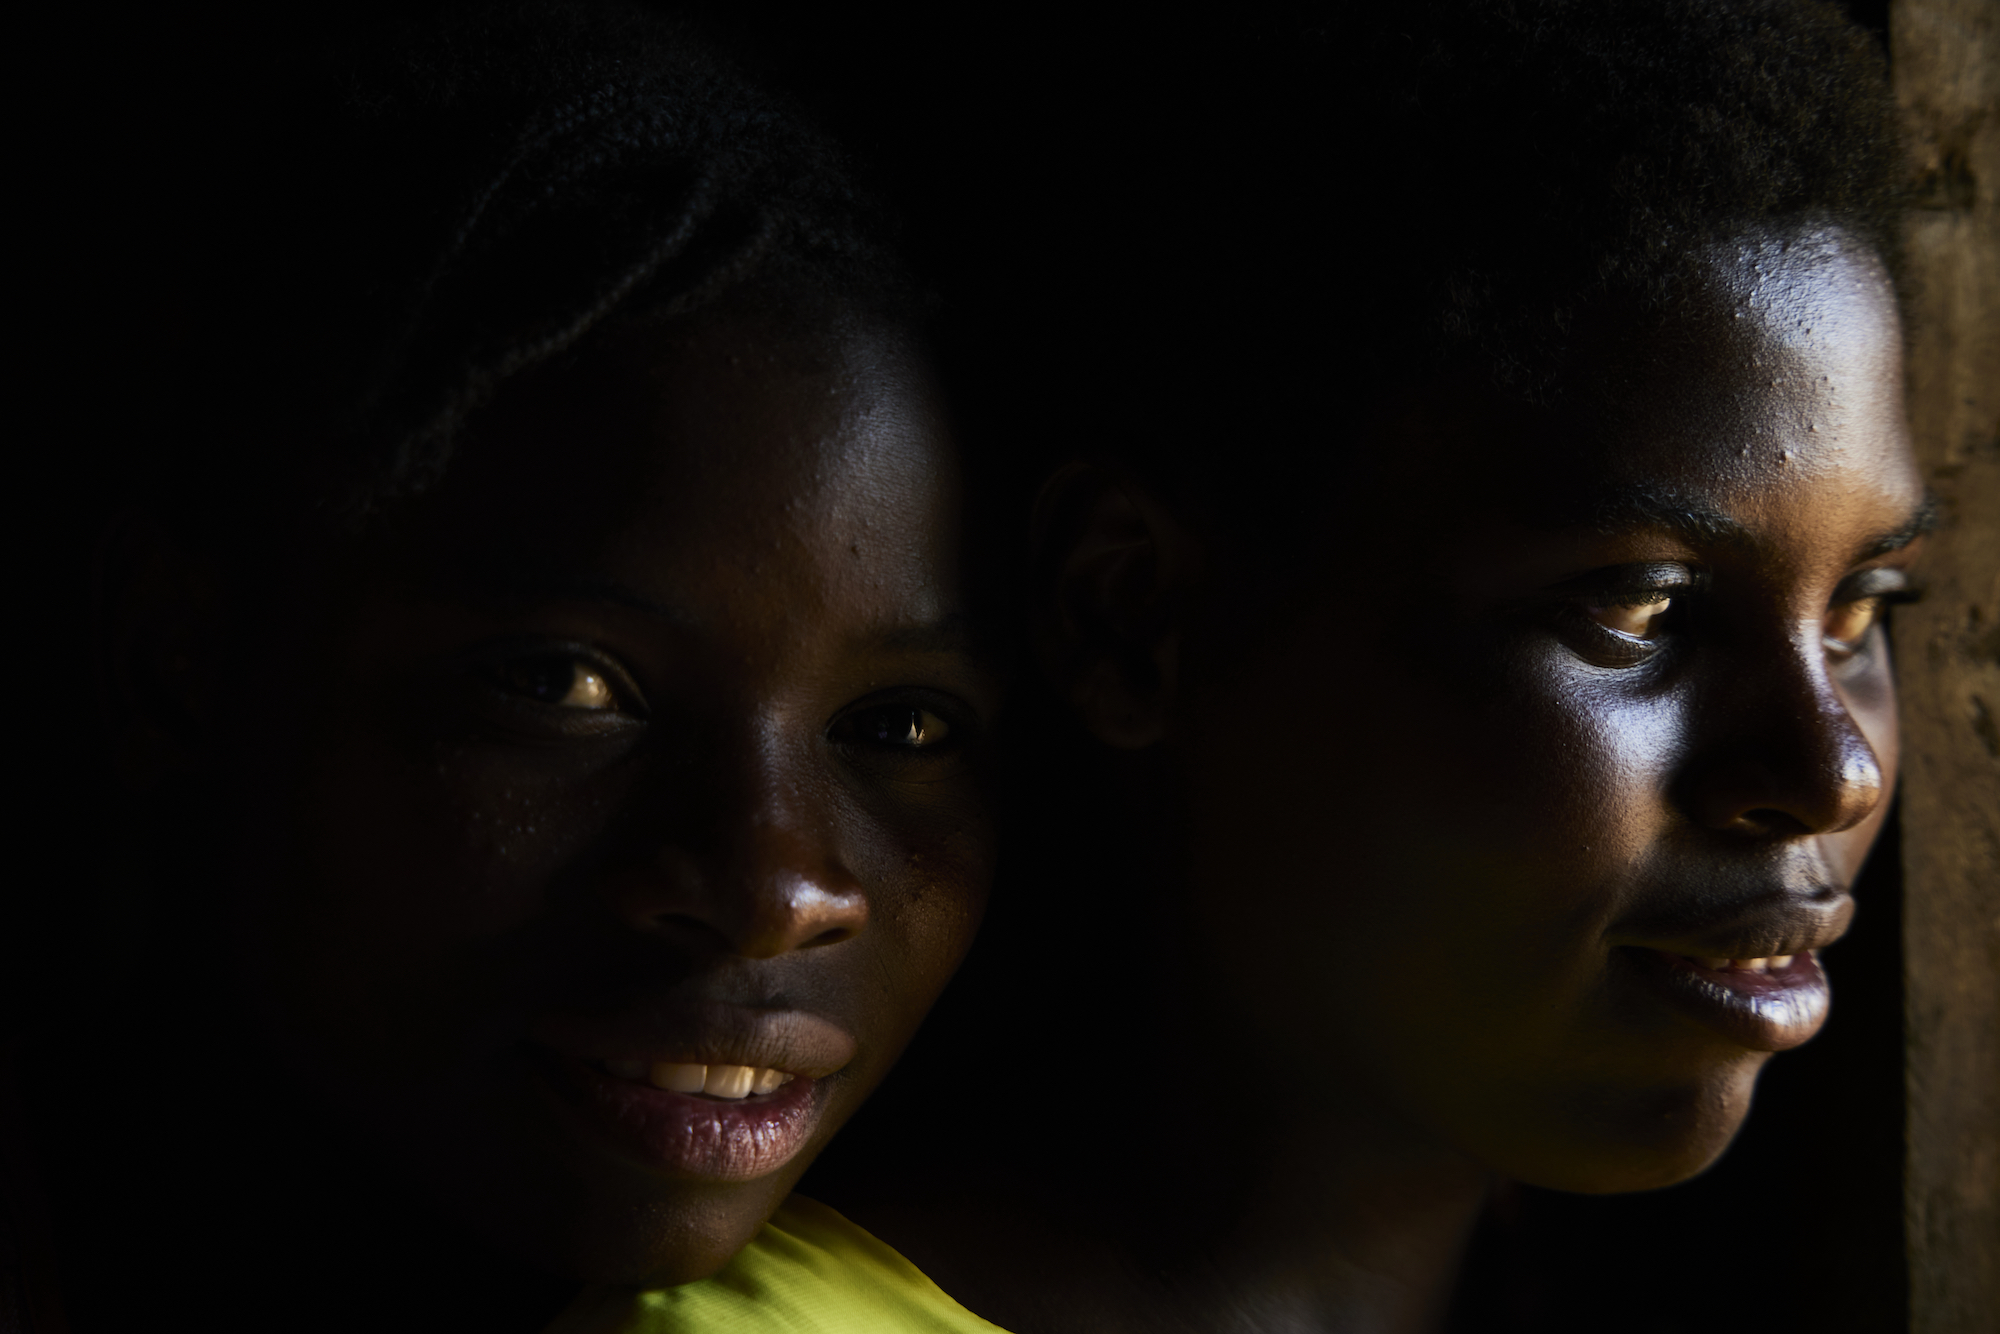 Eliza Tobias, 20, (L) And Her Sister In Law, Alefa Banda, 22, In Their Home In Changanilo Village, Ntchisi District, Malawi. May 2022 Laura El Tantawy Wateraid